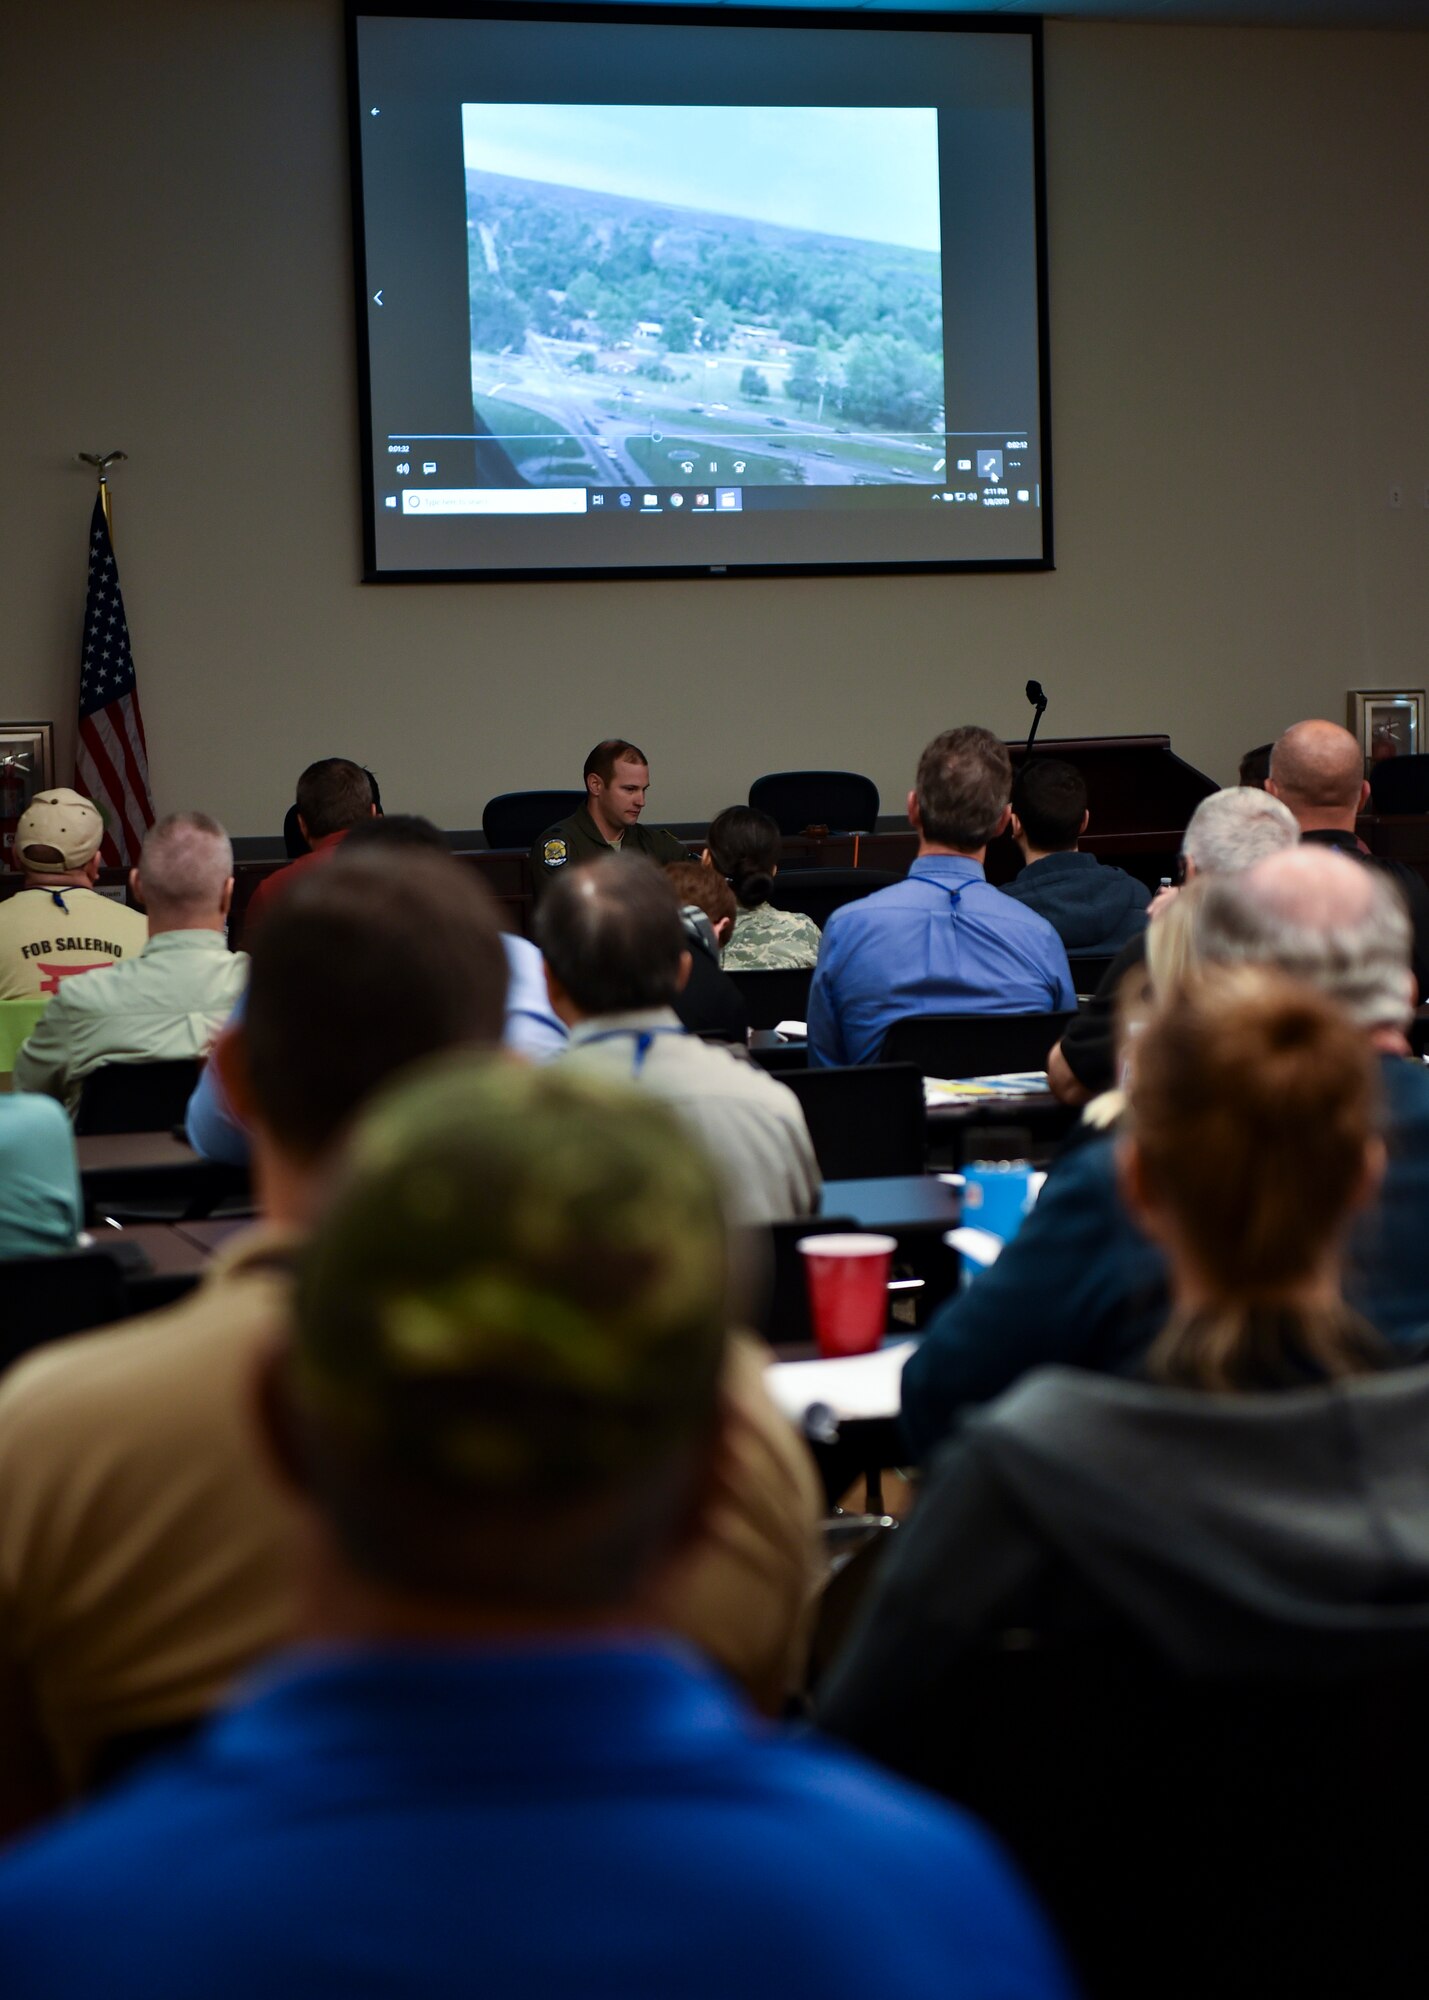 Every three years the 910th Airlift Wing holds the Department of Defense’s Aerial Spray Certification Course in tandem with the Florida Mosquito Control Association’s annual fly-in in Lee County Mosquito Control District near Fort Myers, Florida.